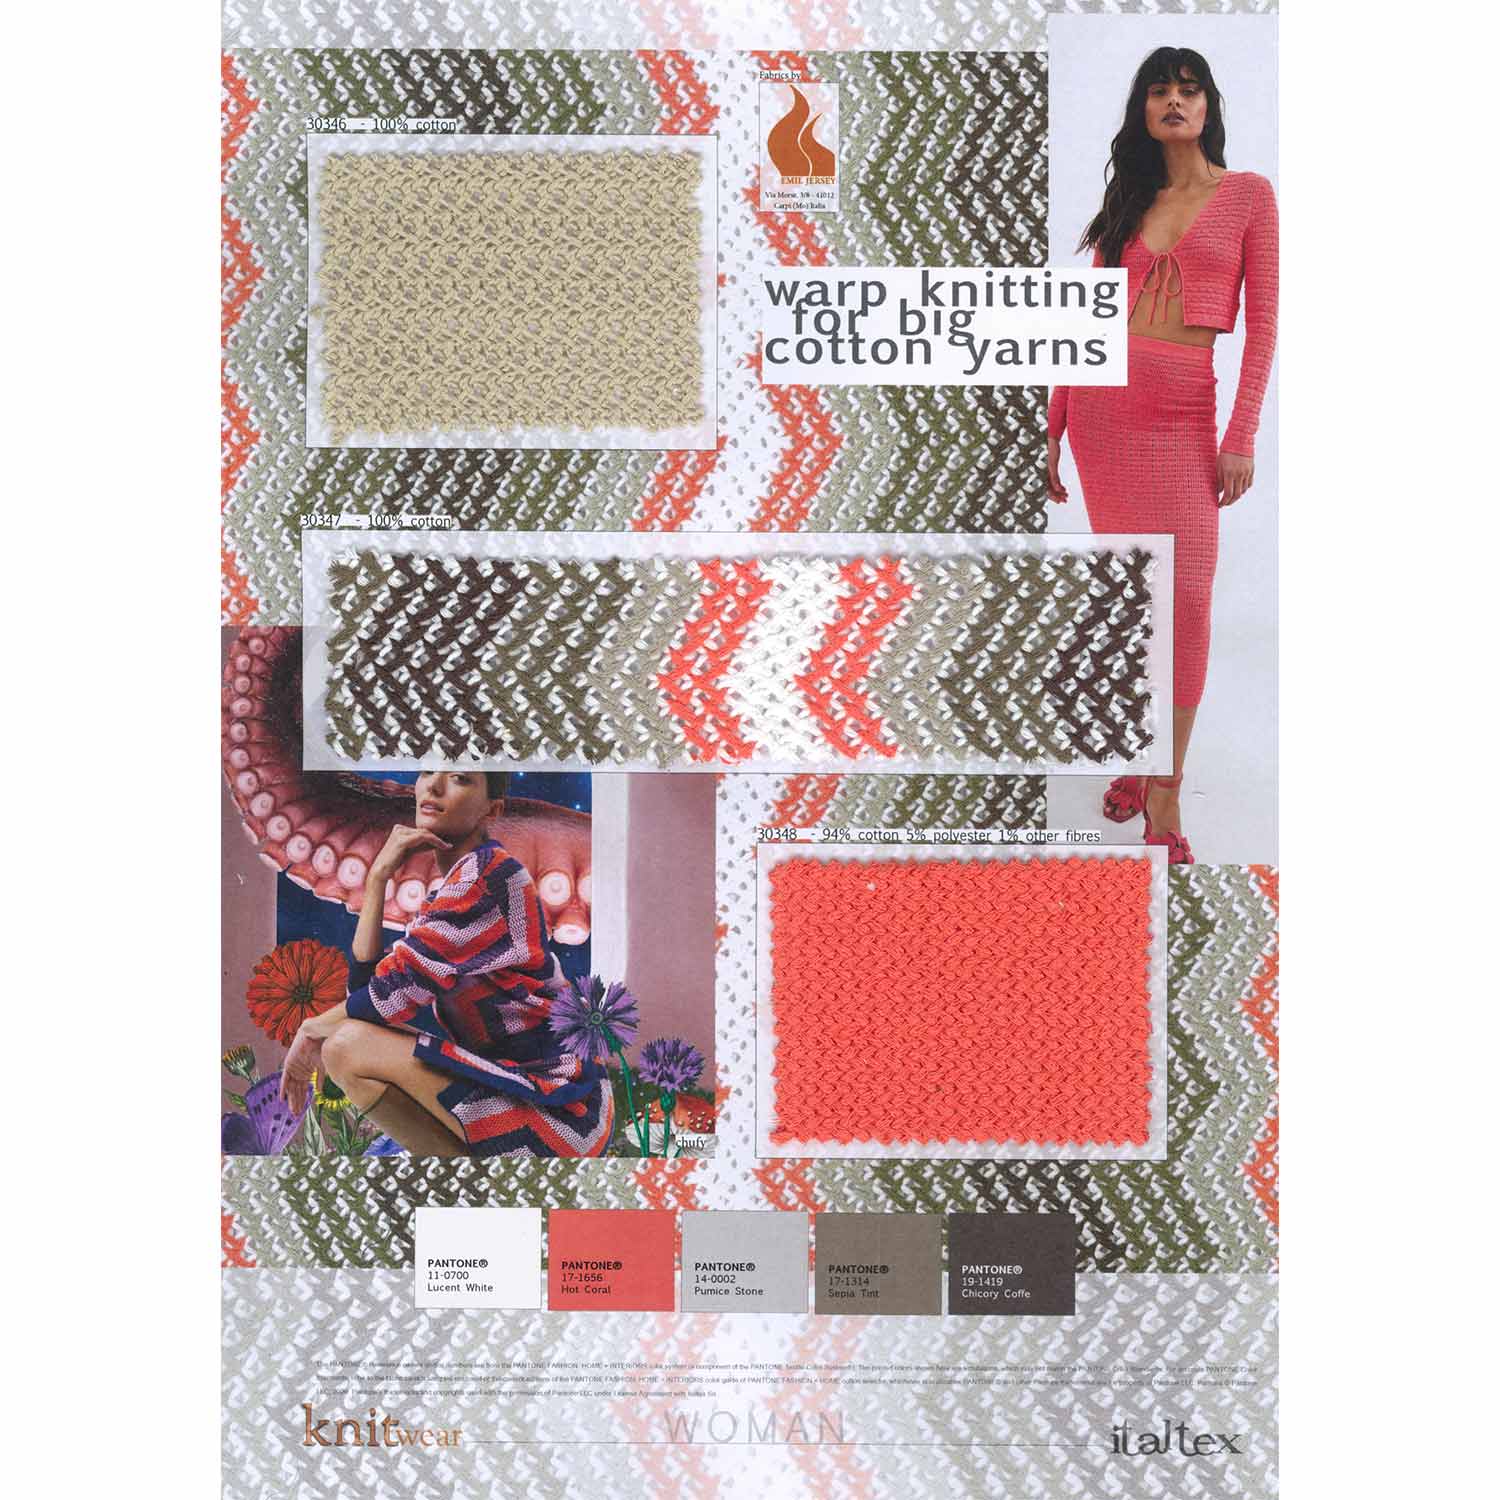 Three fabric swatches of warp knittings for women's wear. One horizontal effect beige solid warp knitting. One vertical effect coral warp knit. One openwork herringbone pattern combining different colors. white, coral, grey, greyish beige, cold brown